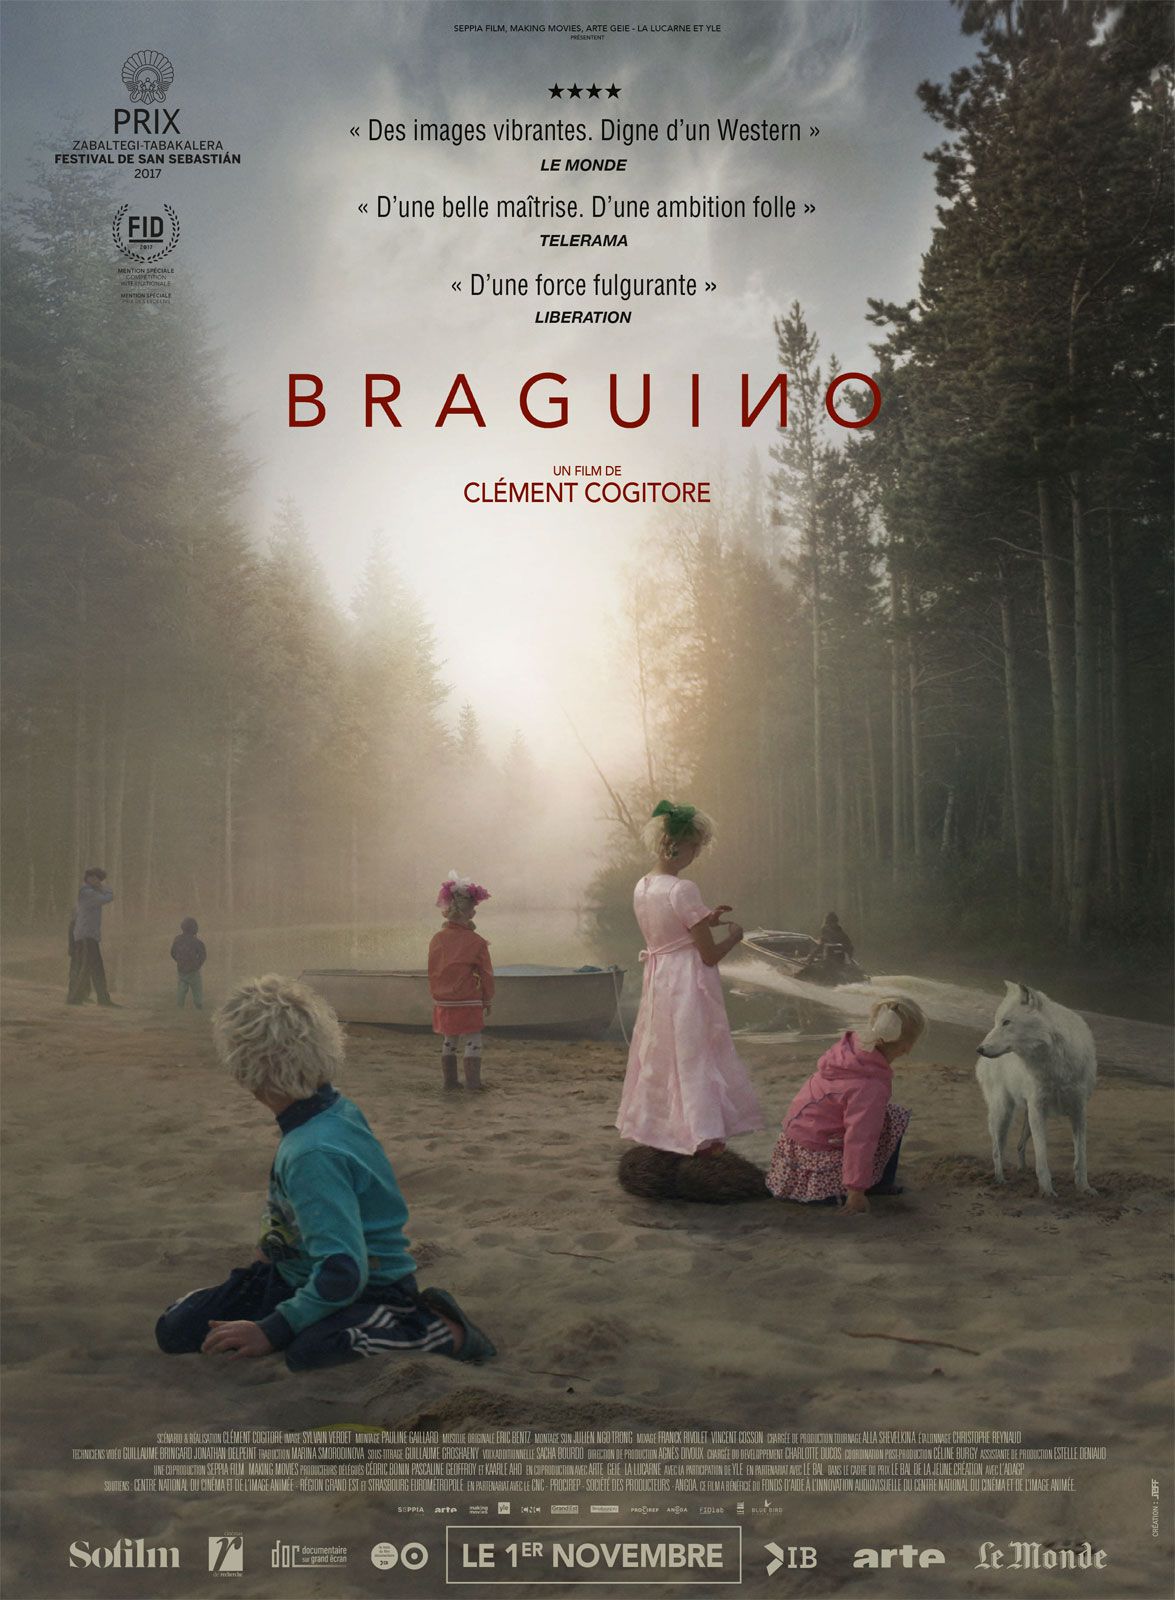 Braguino - Documentaire (2017) streaming VF gratuit complet